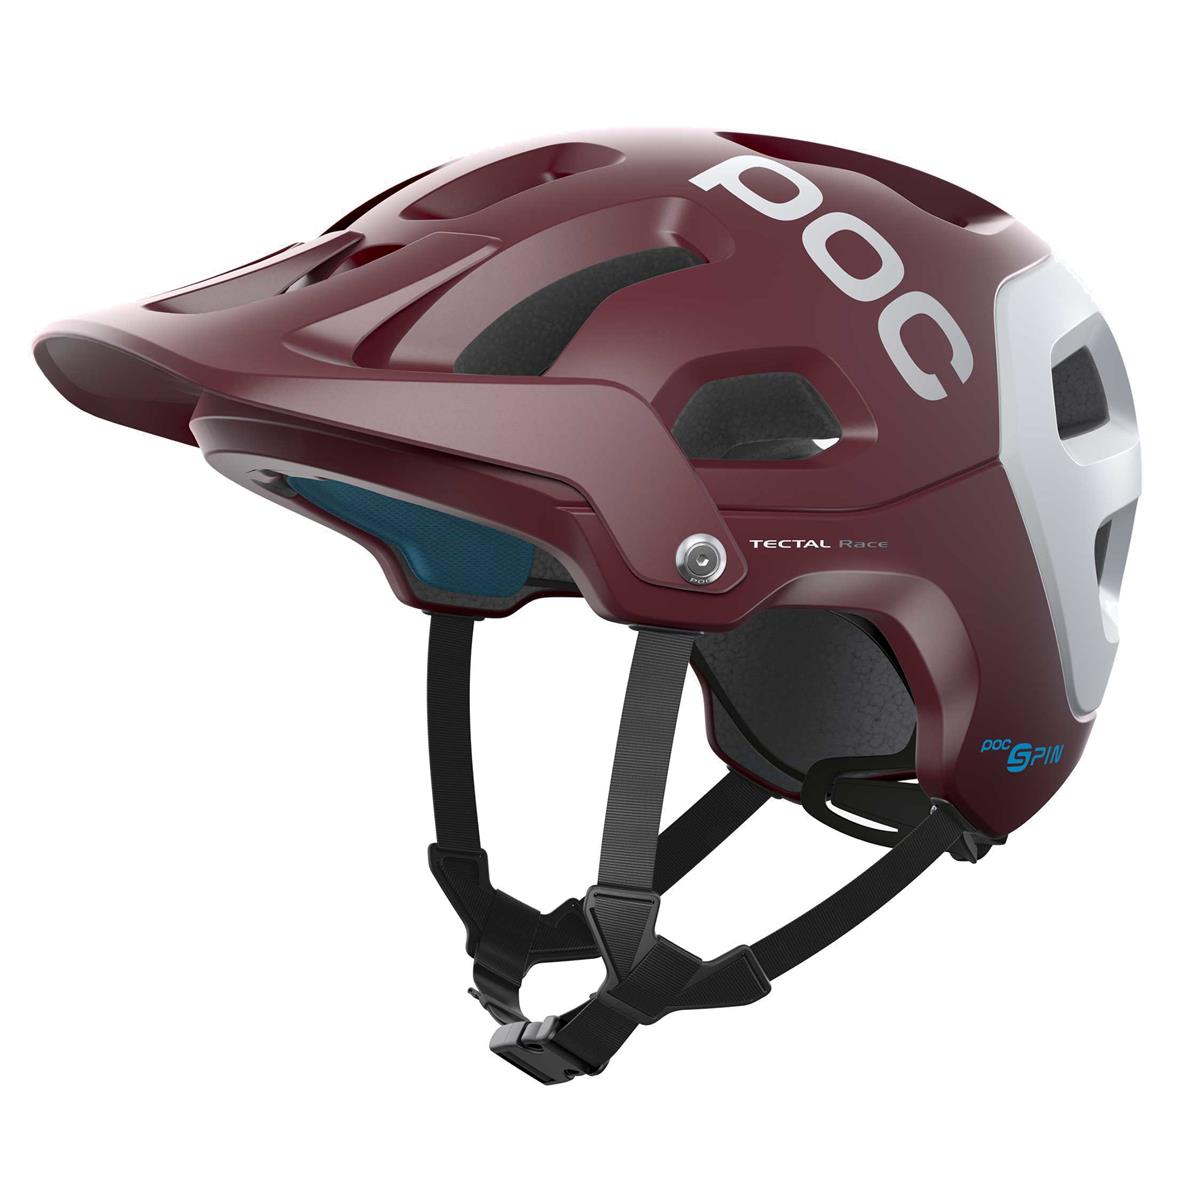 Enduro Helmet Tectal Race Spin Red Size XS-S (51-54cm)